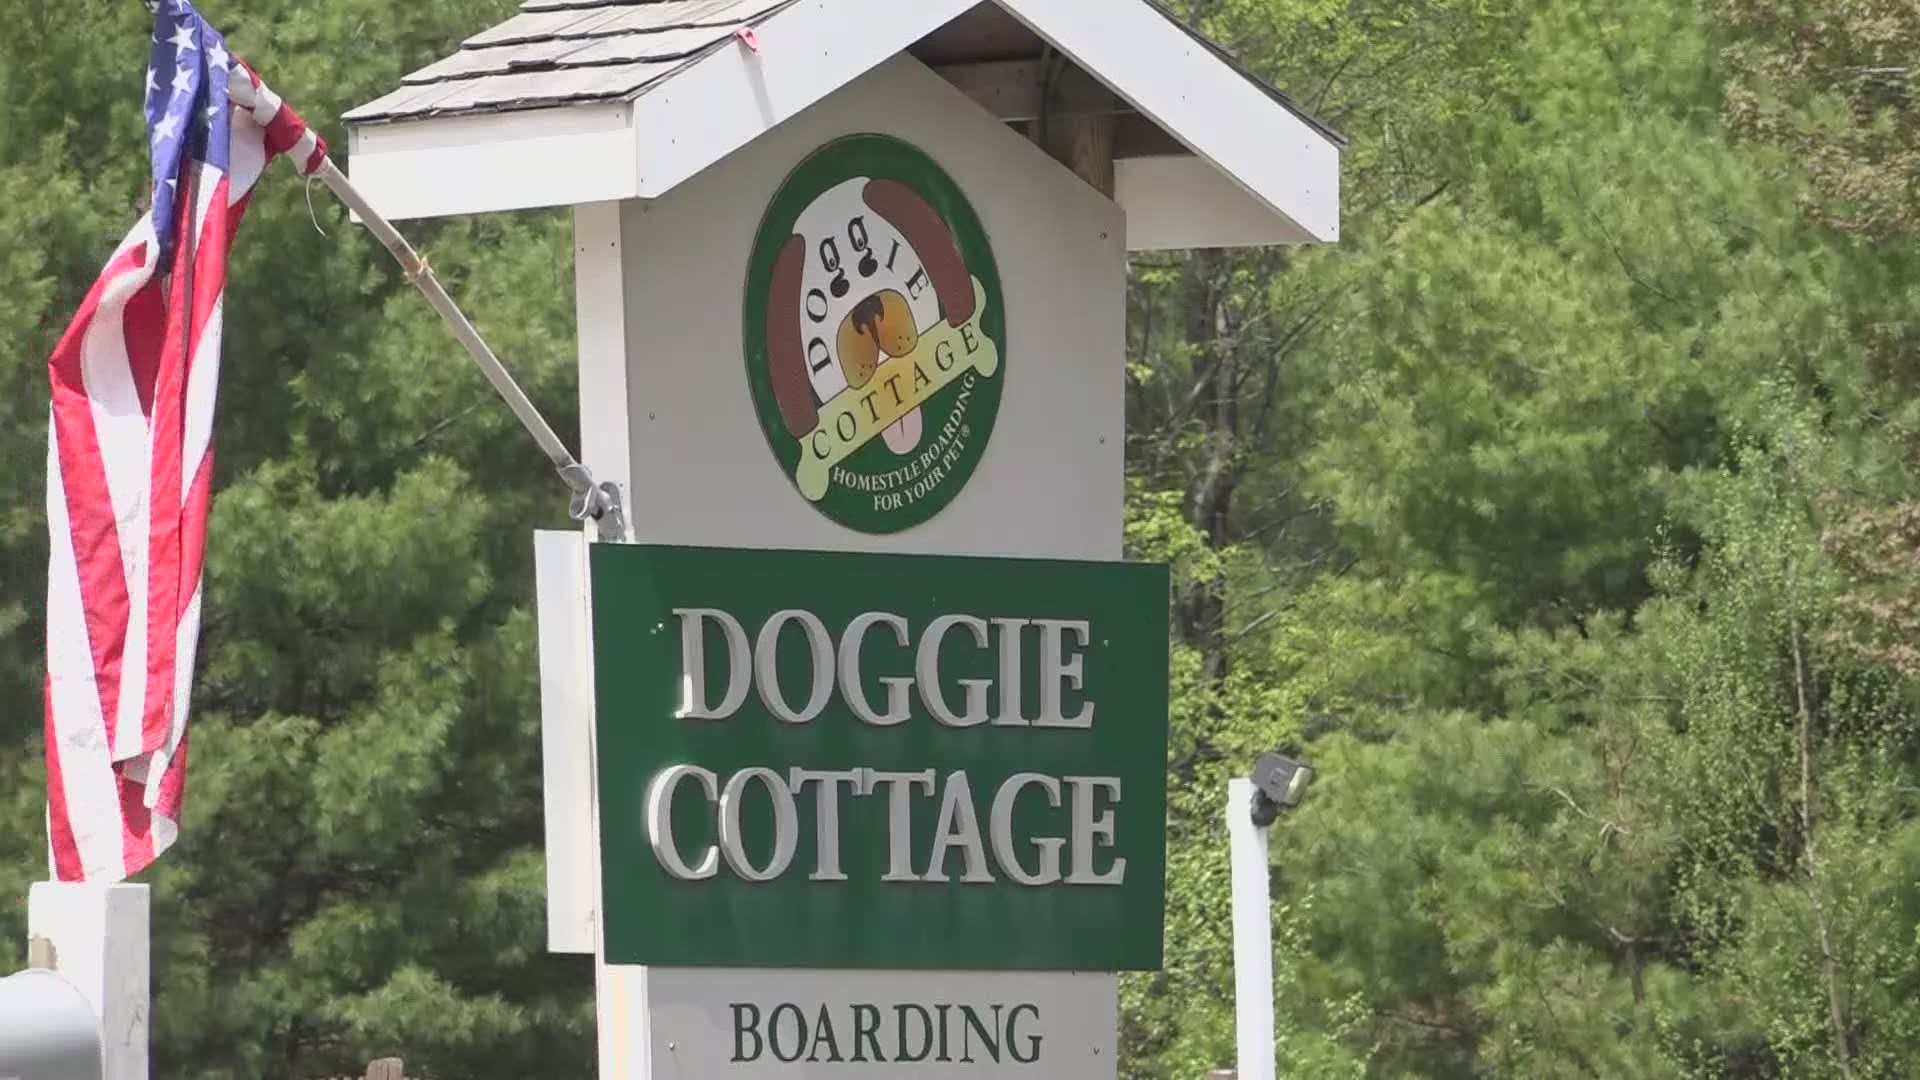 Samantha Larson, a former employee at The Doggy Cottage in Scarborough, has started a petition to have the business shut down.